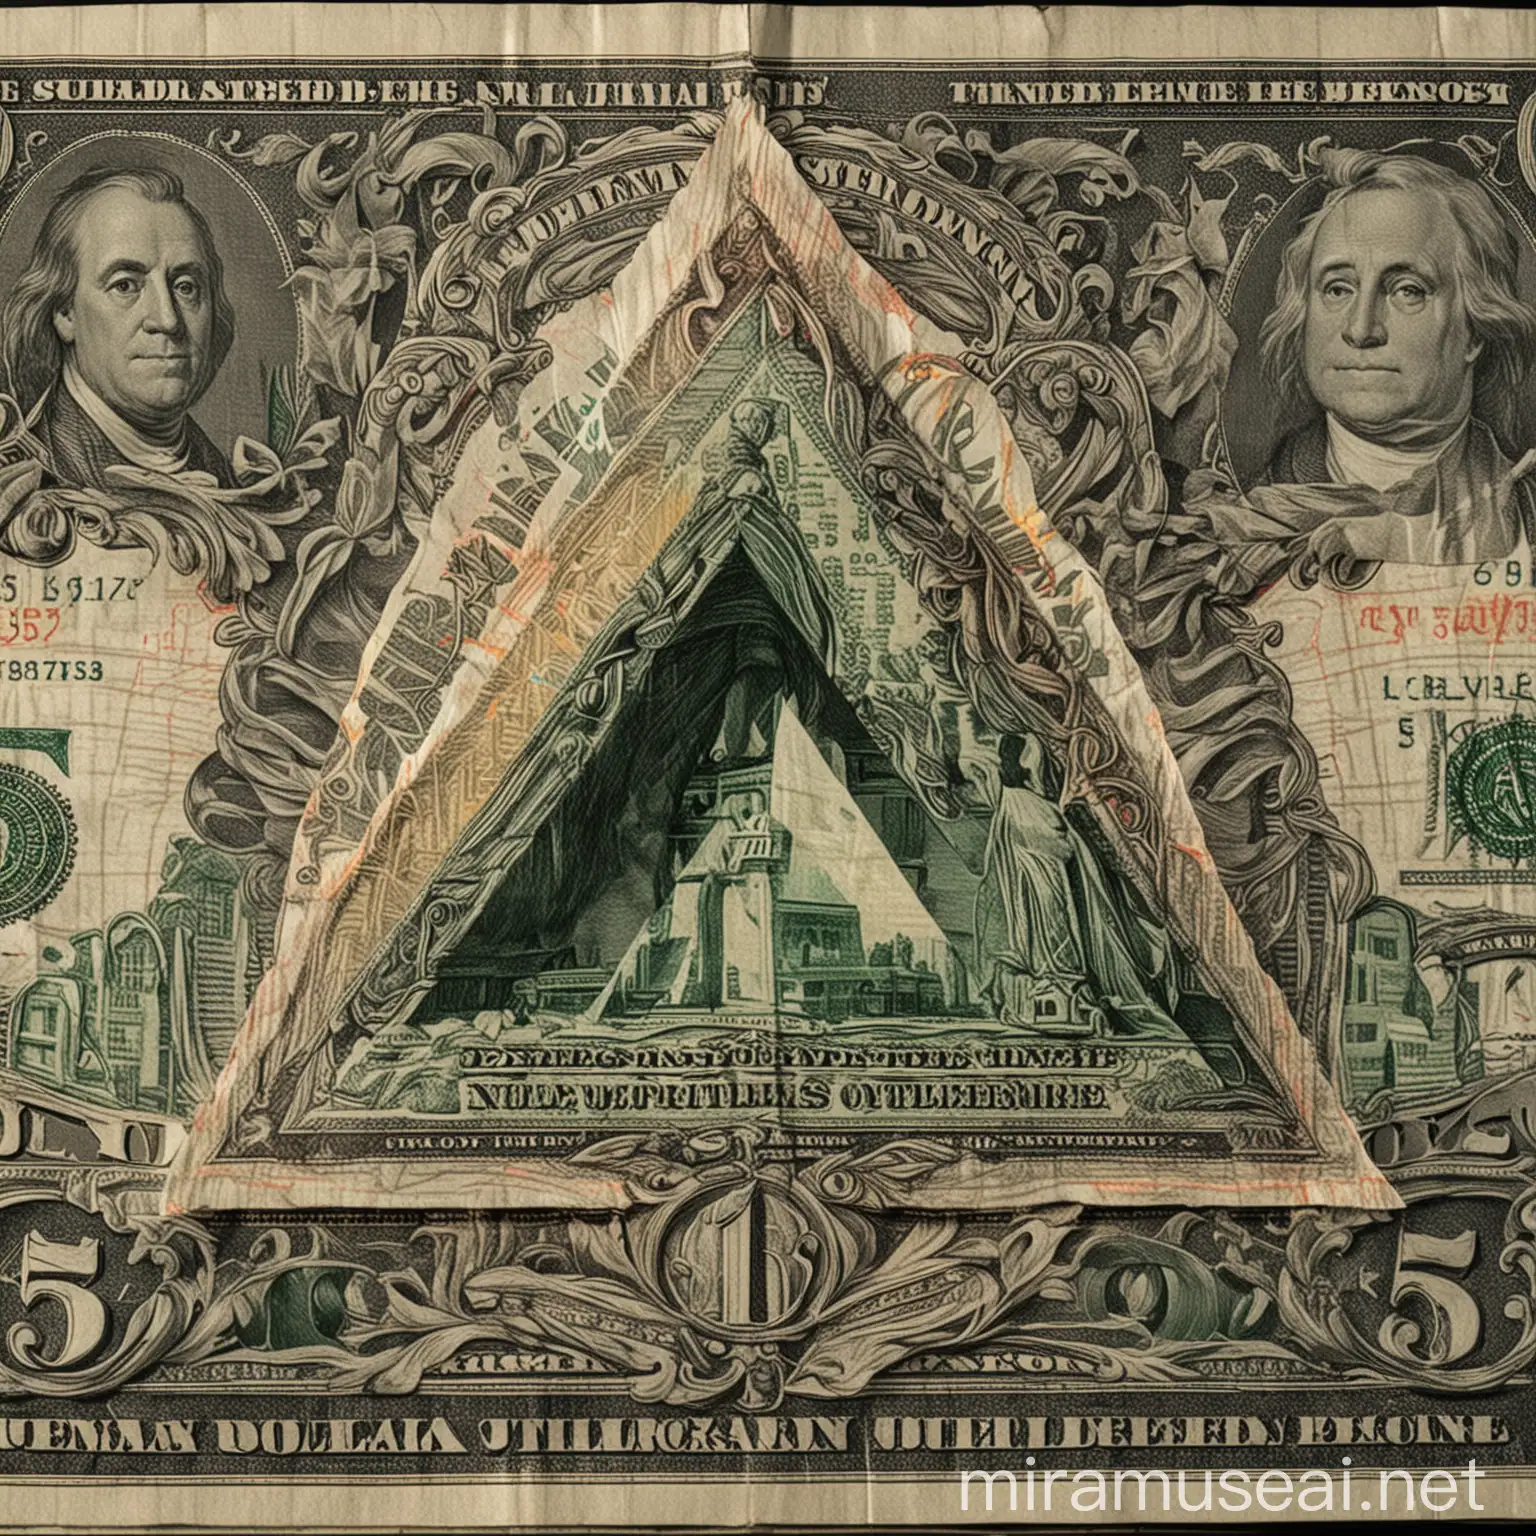 Geometric Triangle with Dollar Bill Patterns and Holographic Waves